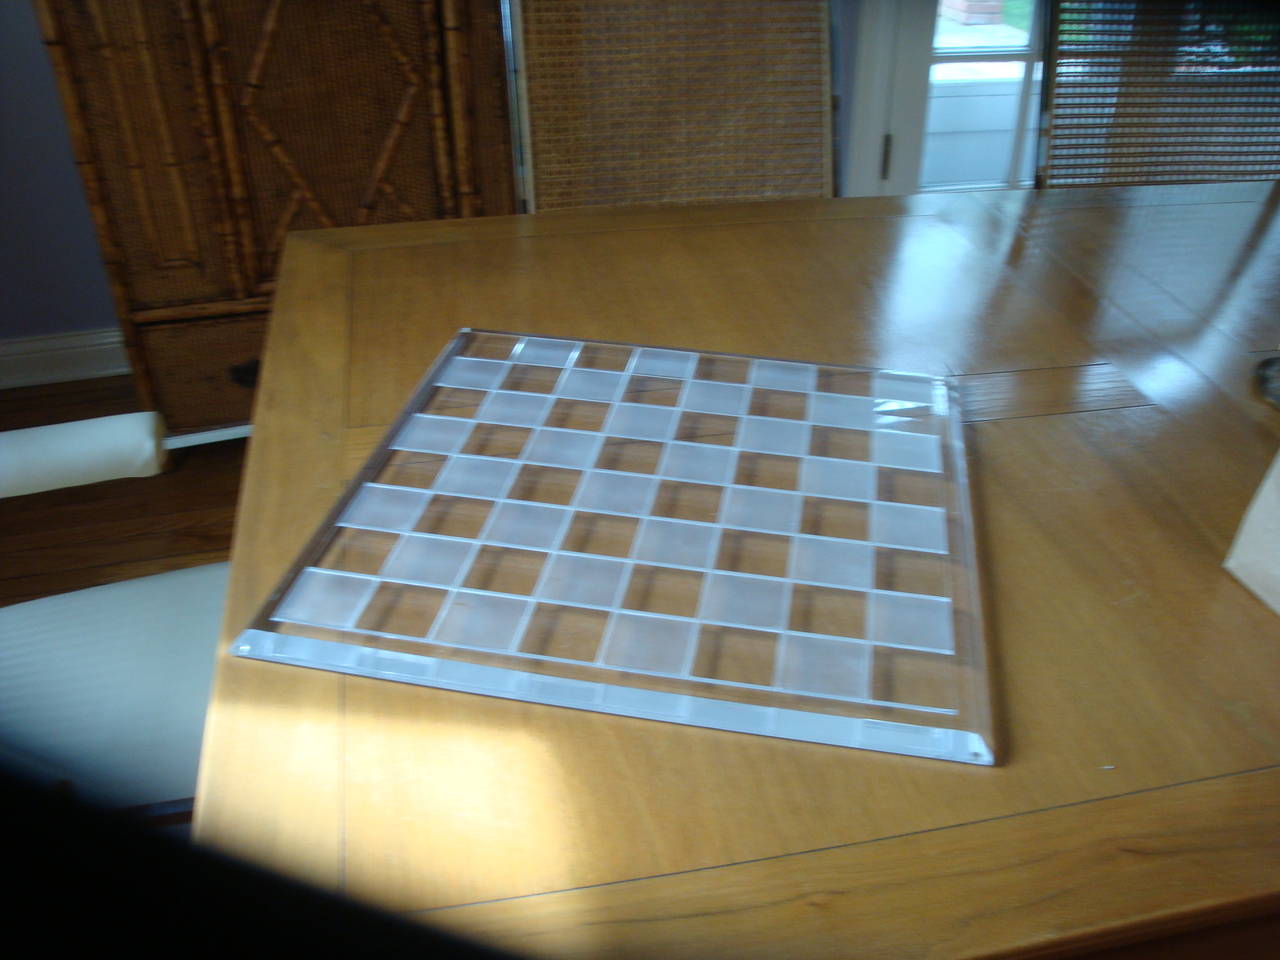 American Austin Cox Chess Set and Lucite Board